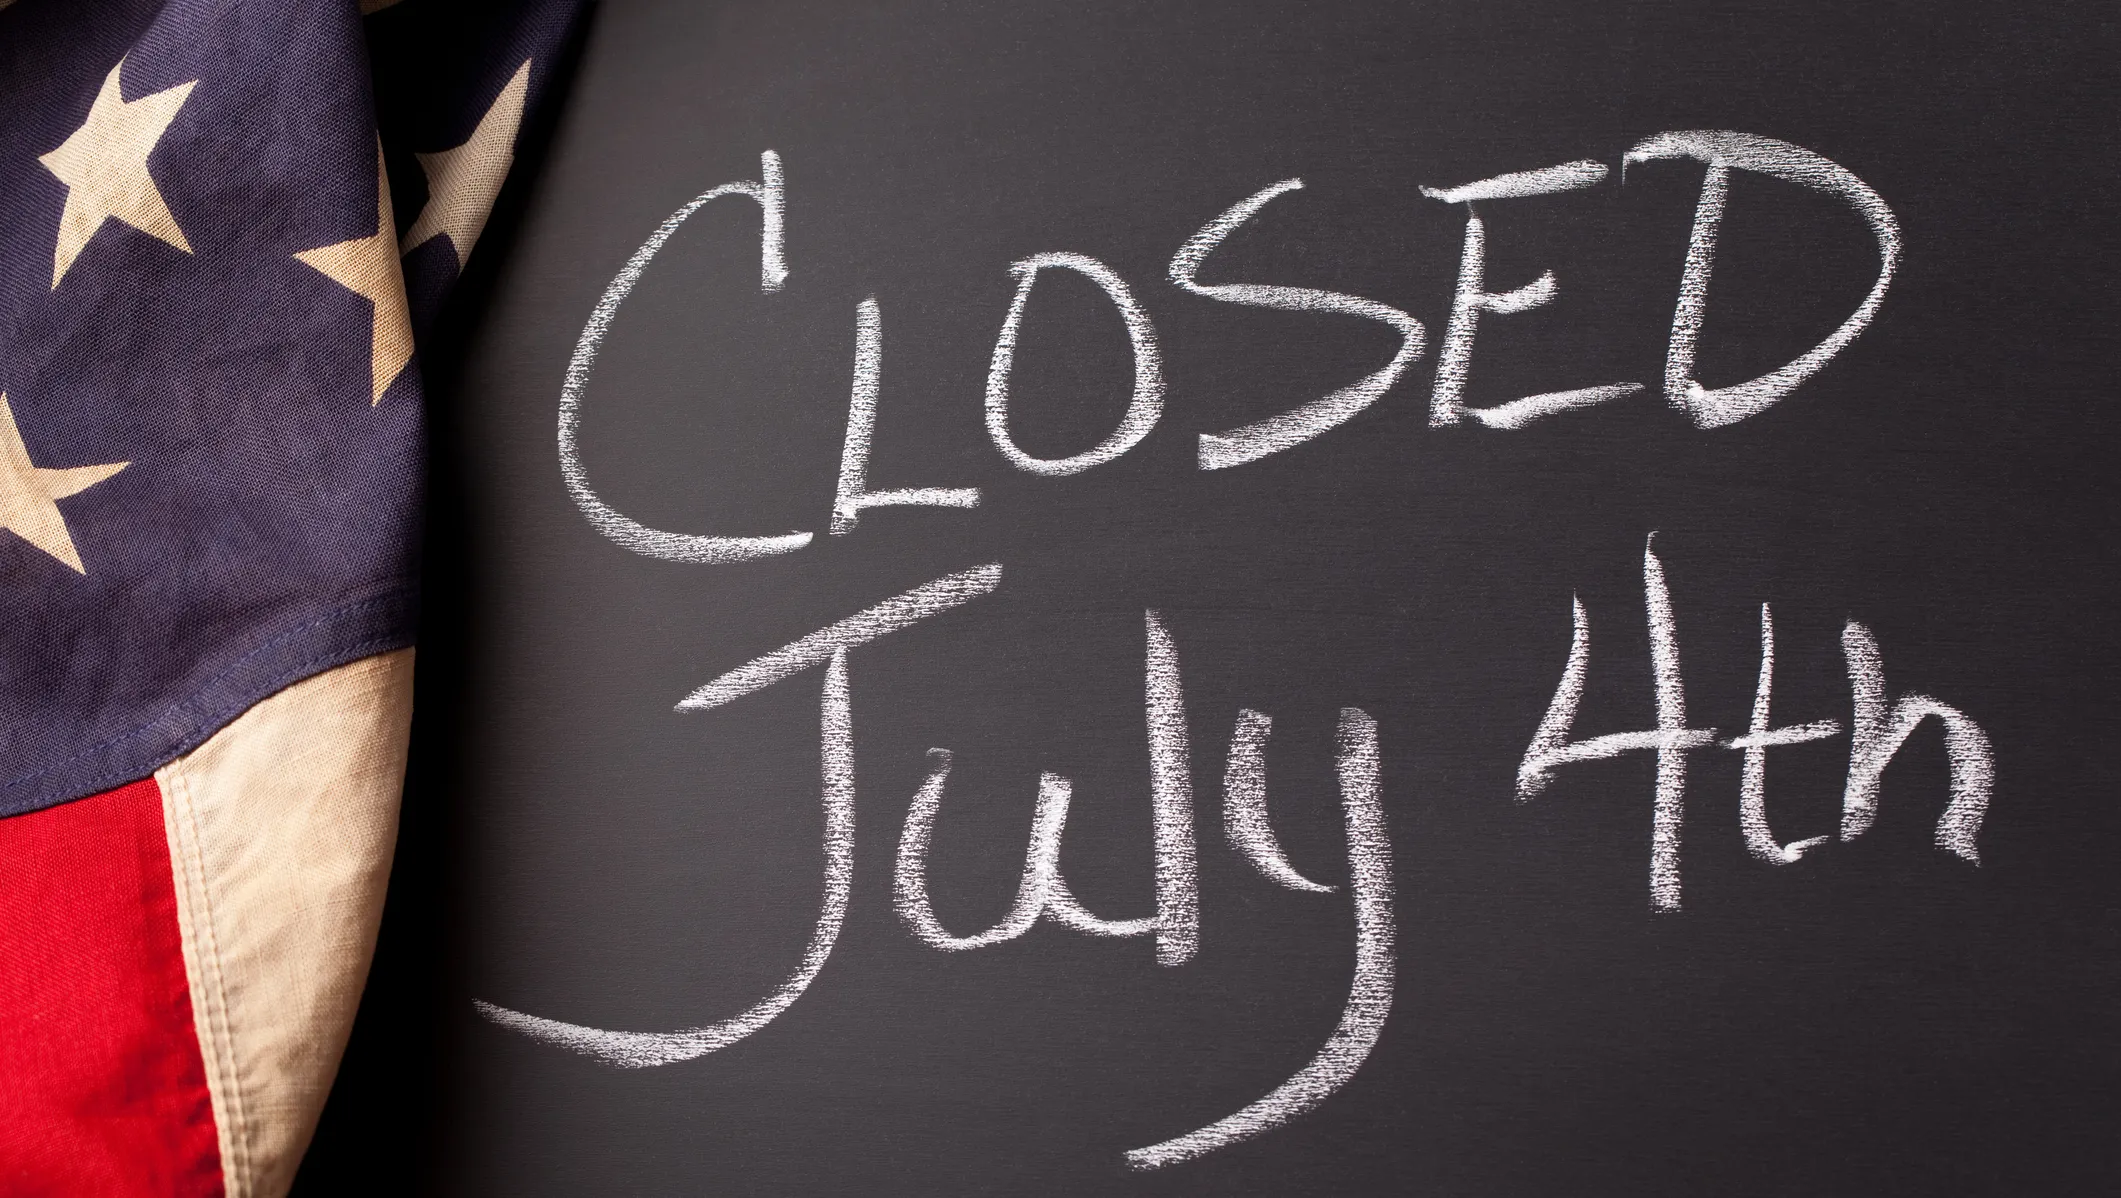 July 4th Holiday Hours: What’s Open, What’s Closed